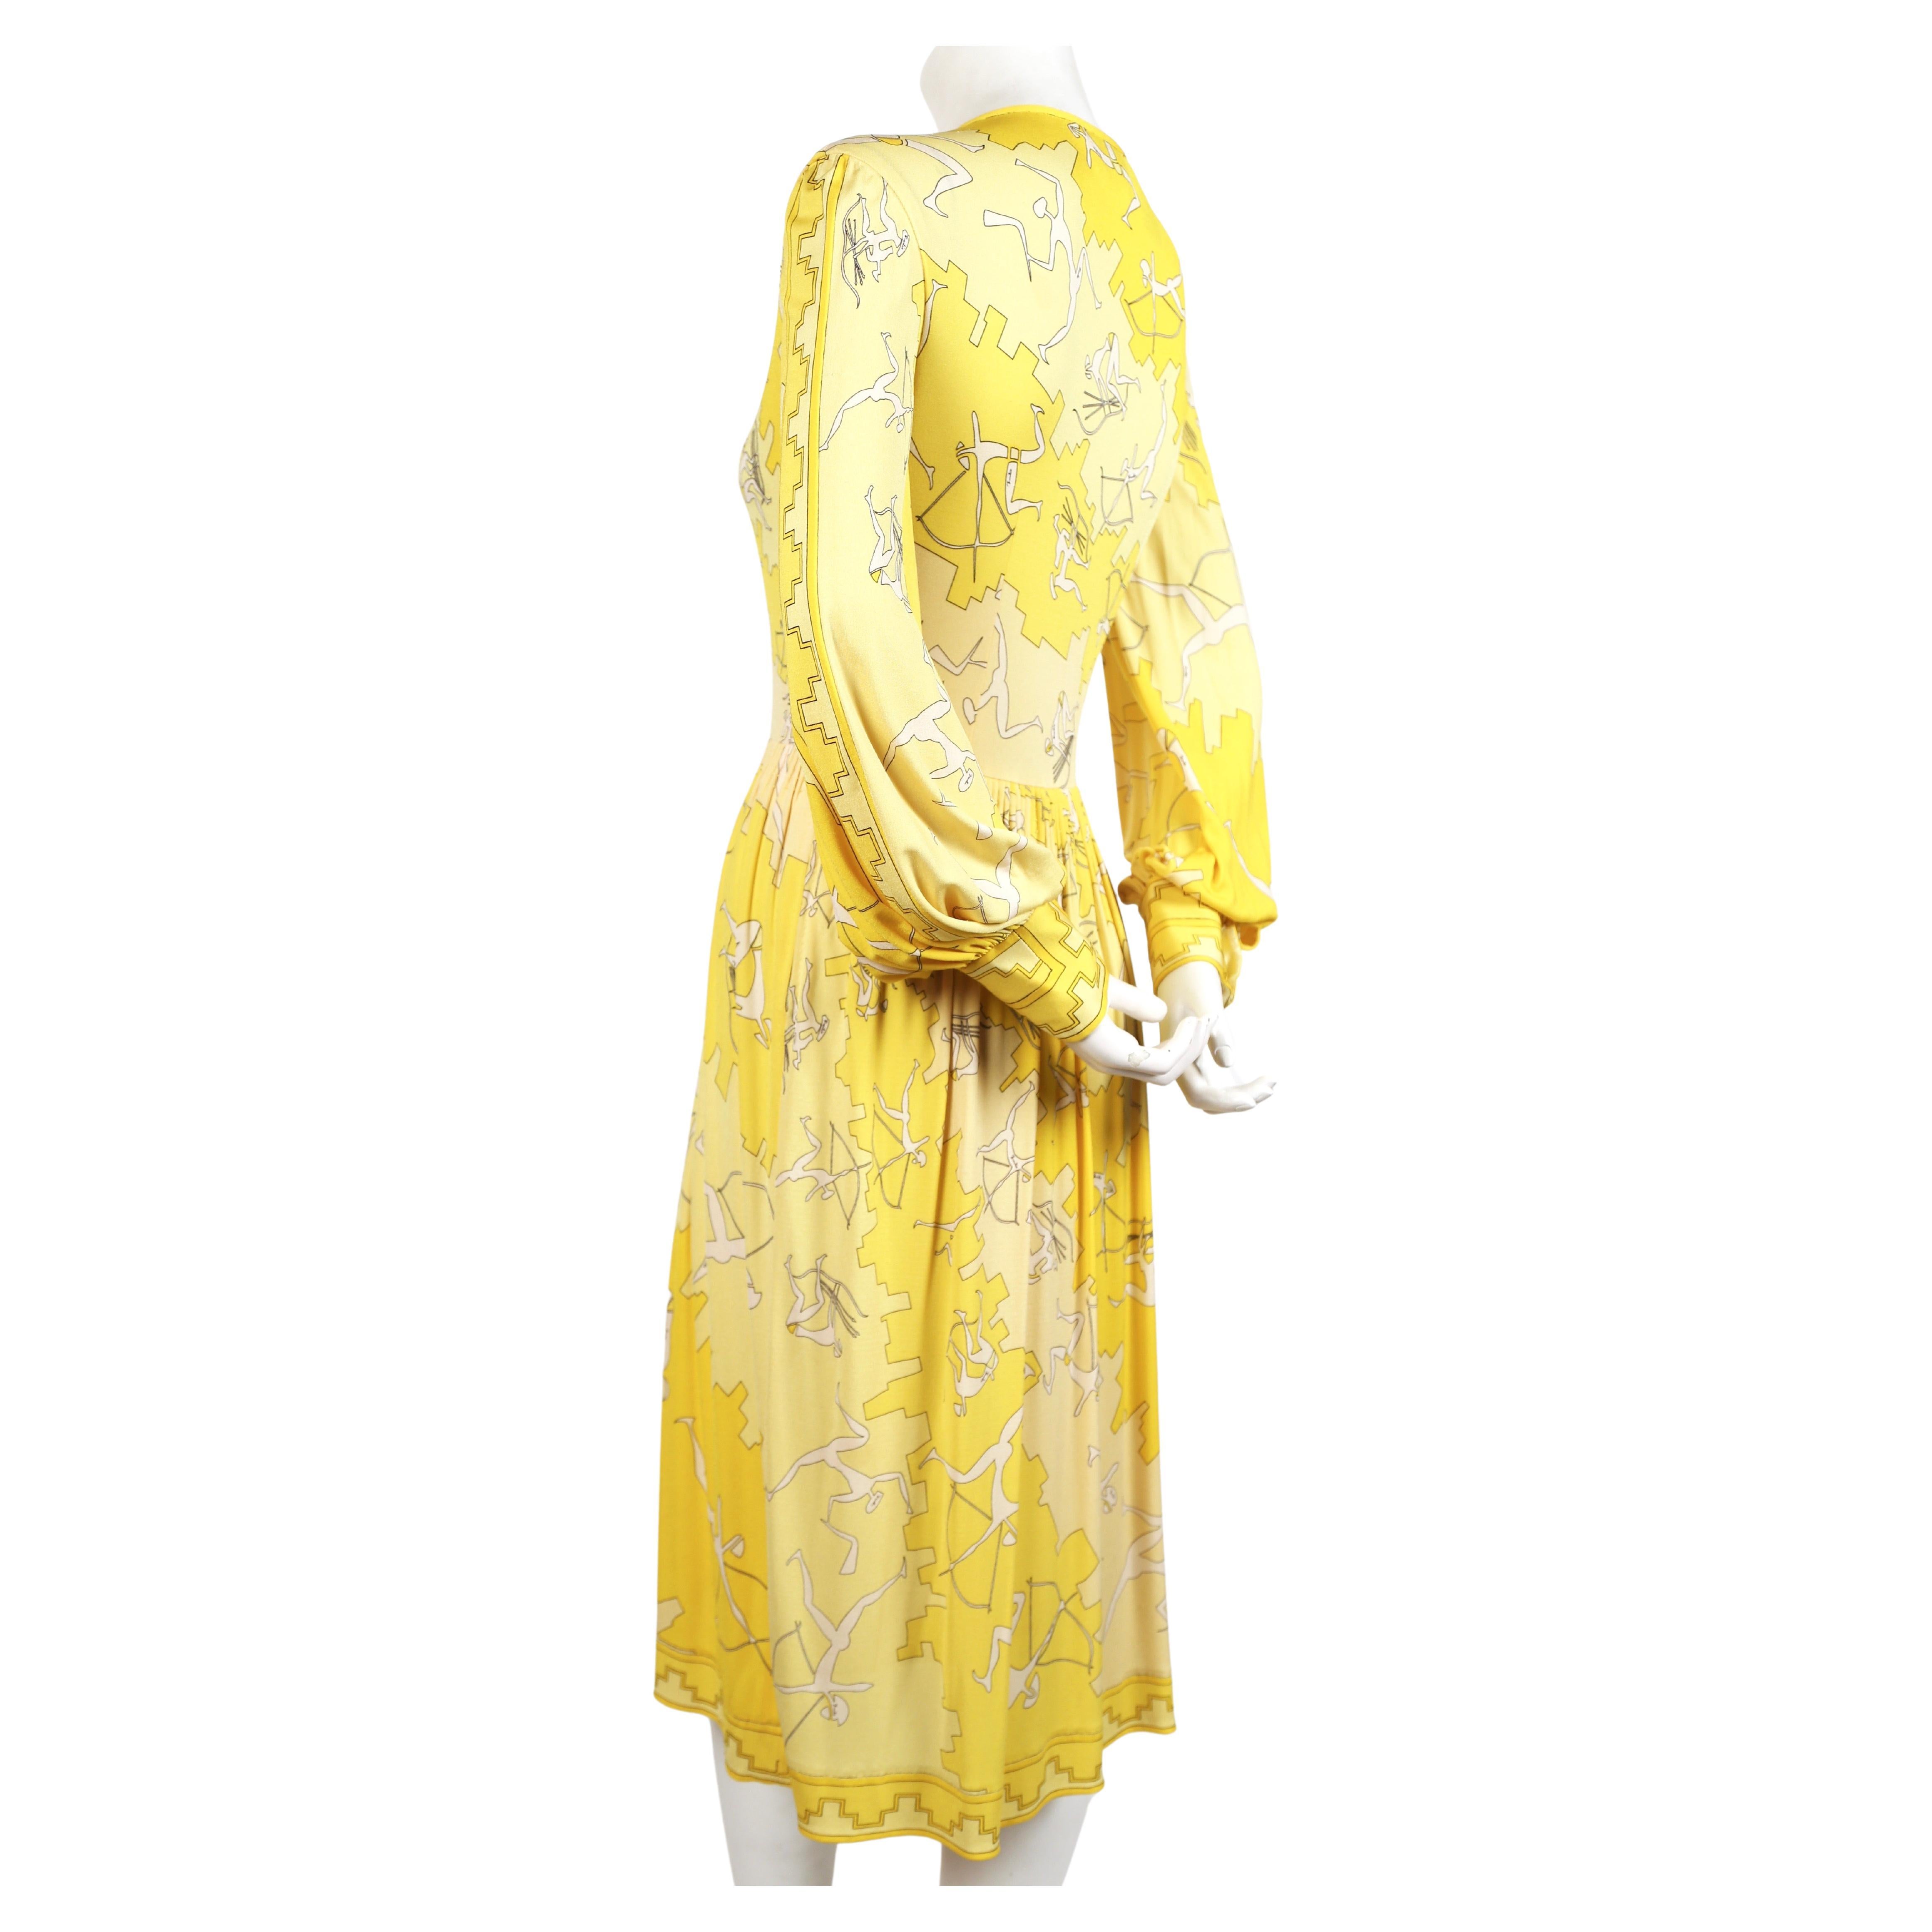 1970's EMILIO PUCCI archery print silk jersey dress with hand stitching In Good Condition For Sale In San Fransisco, CA